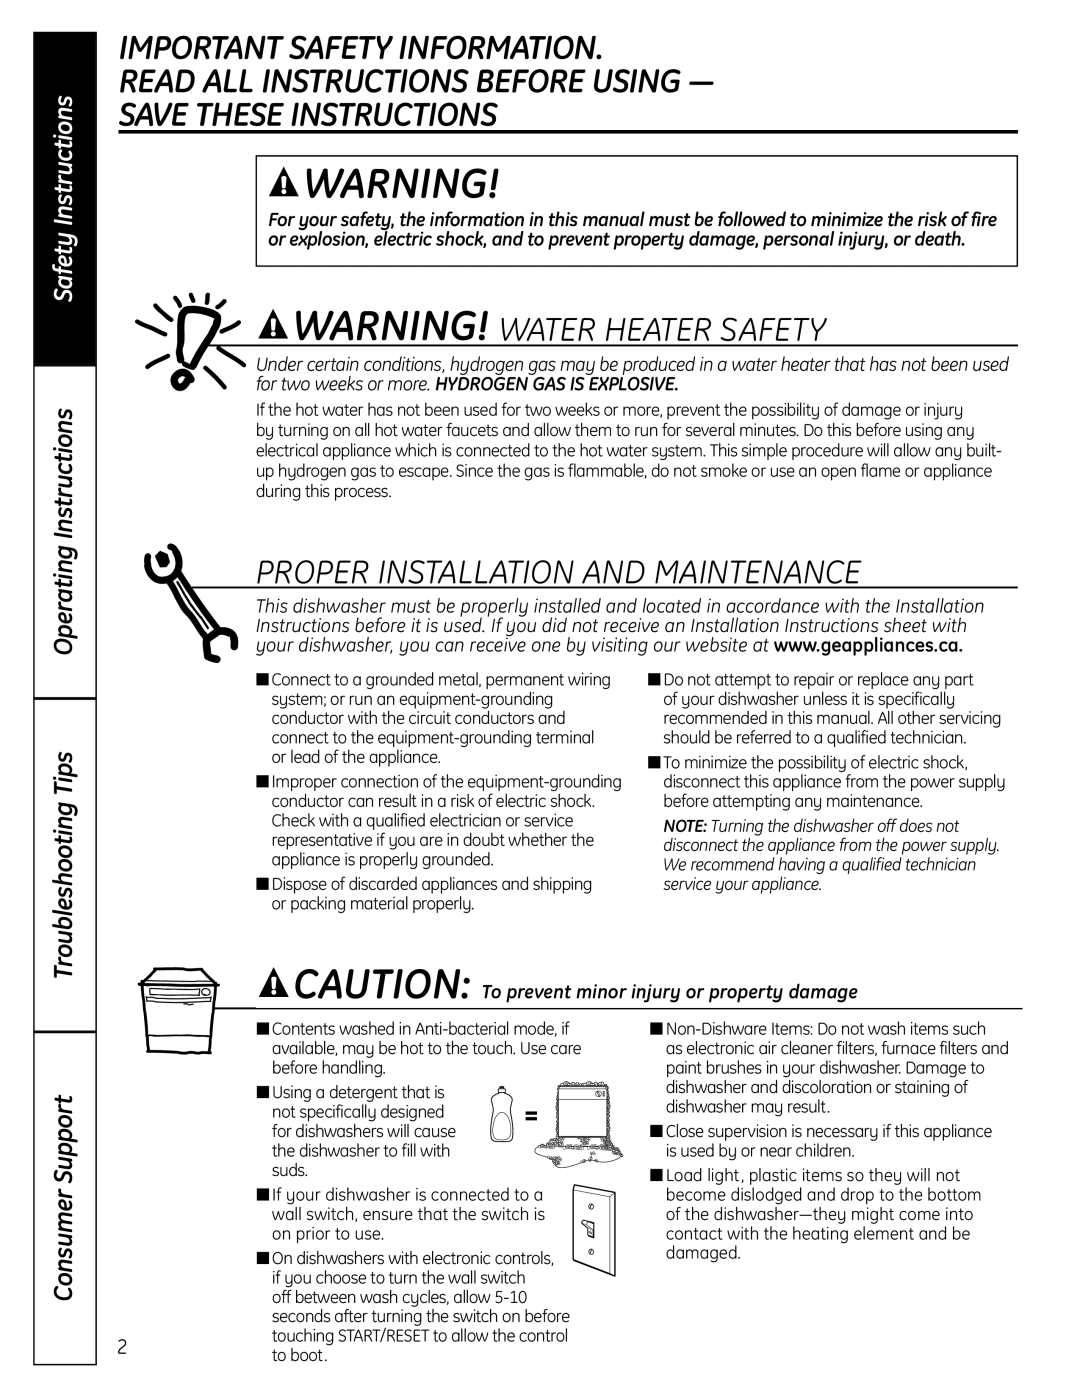 GE PDW7000 Series, GLD6900 Series Important Safety Information Read All Instructions Before Using, Save These Instructions 